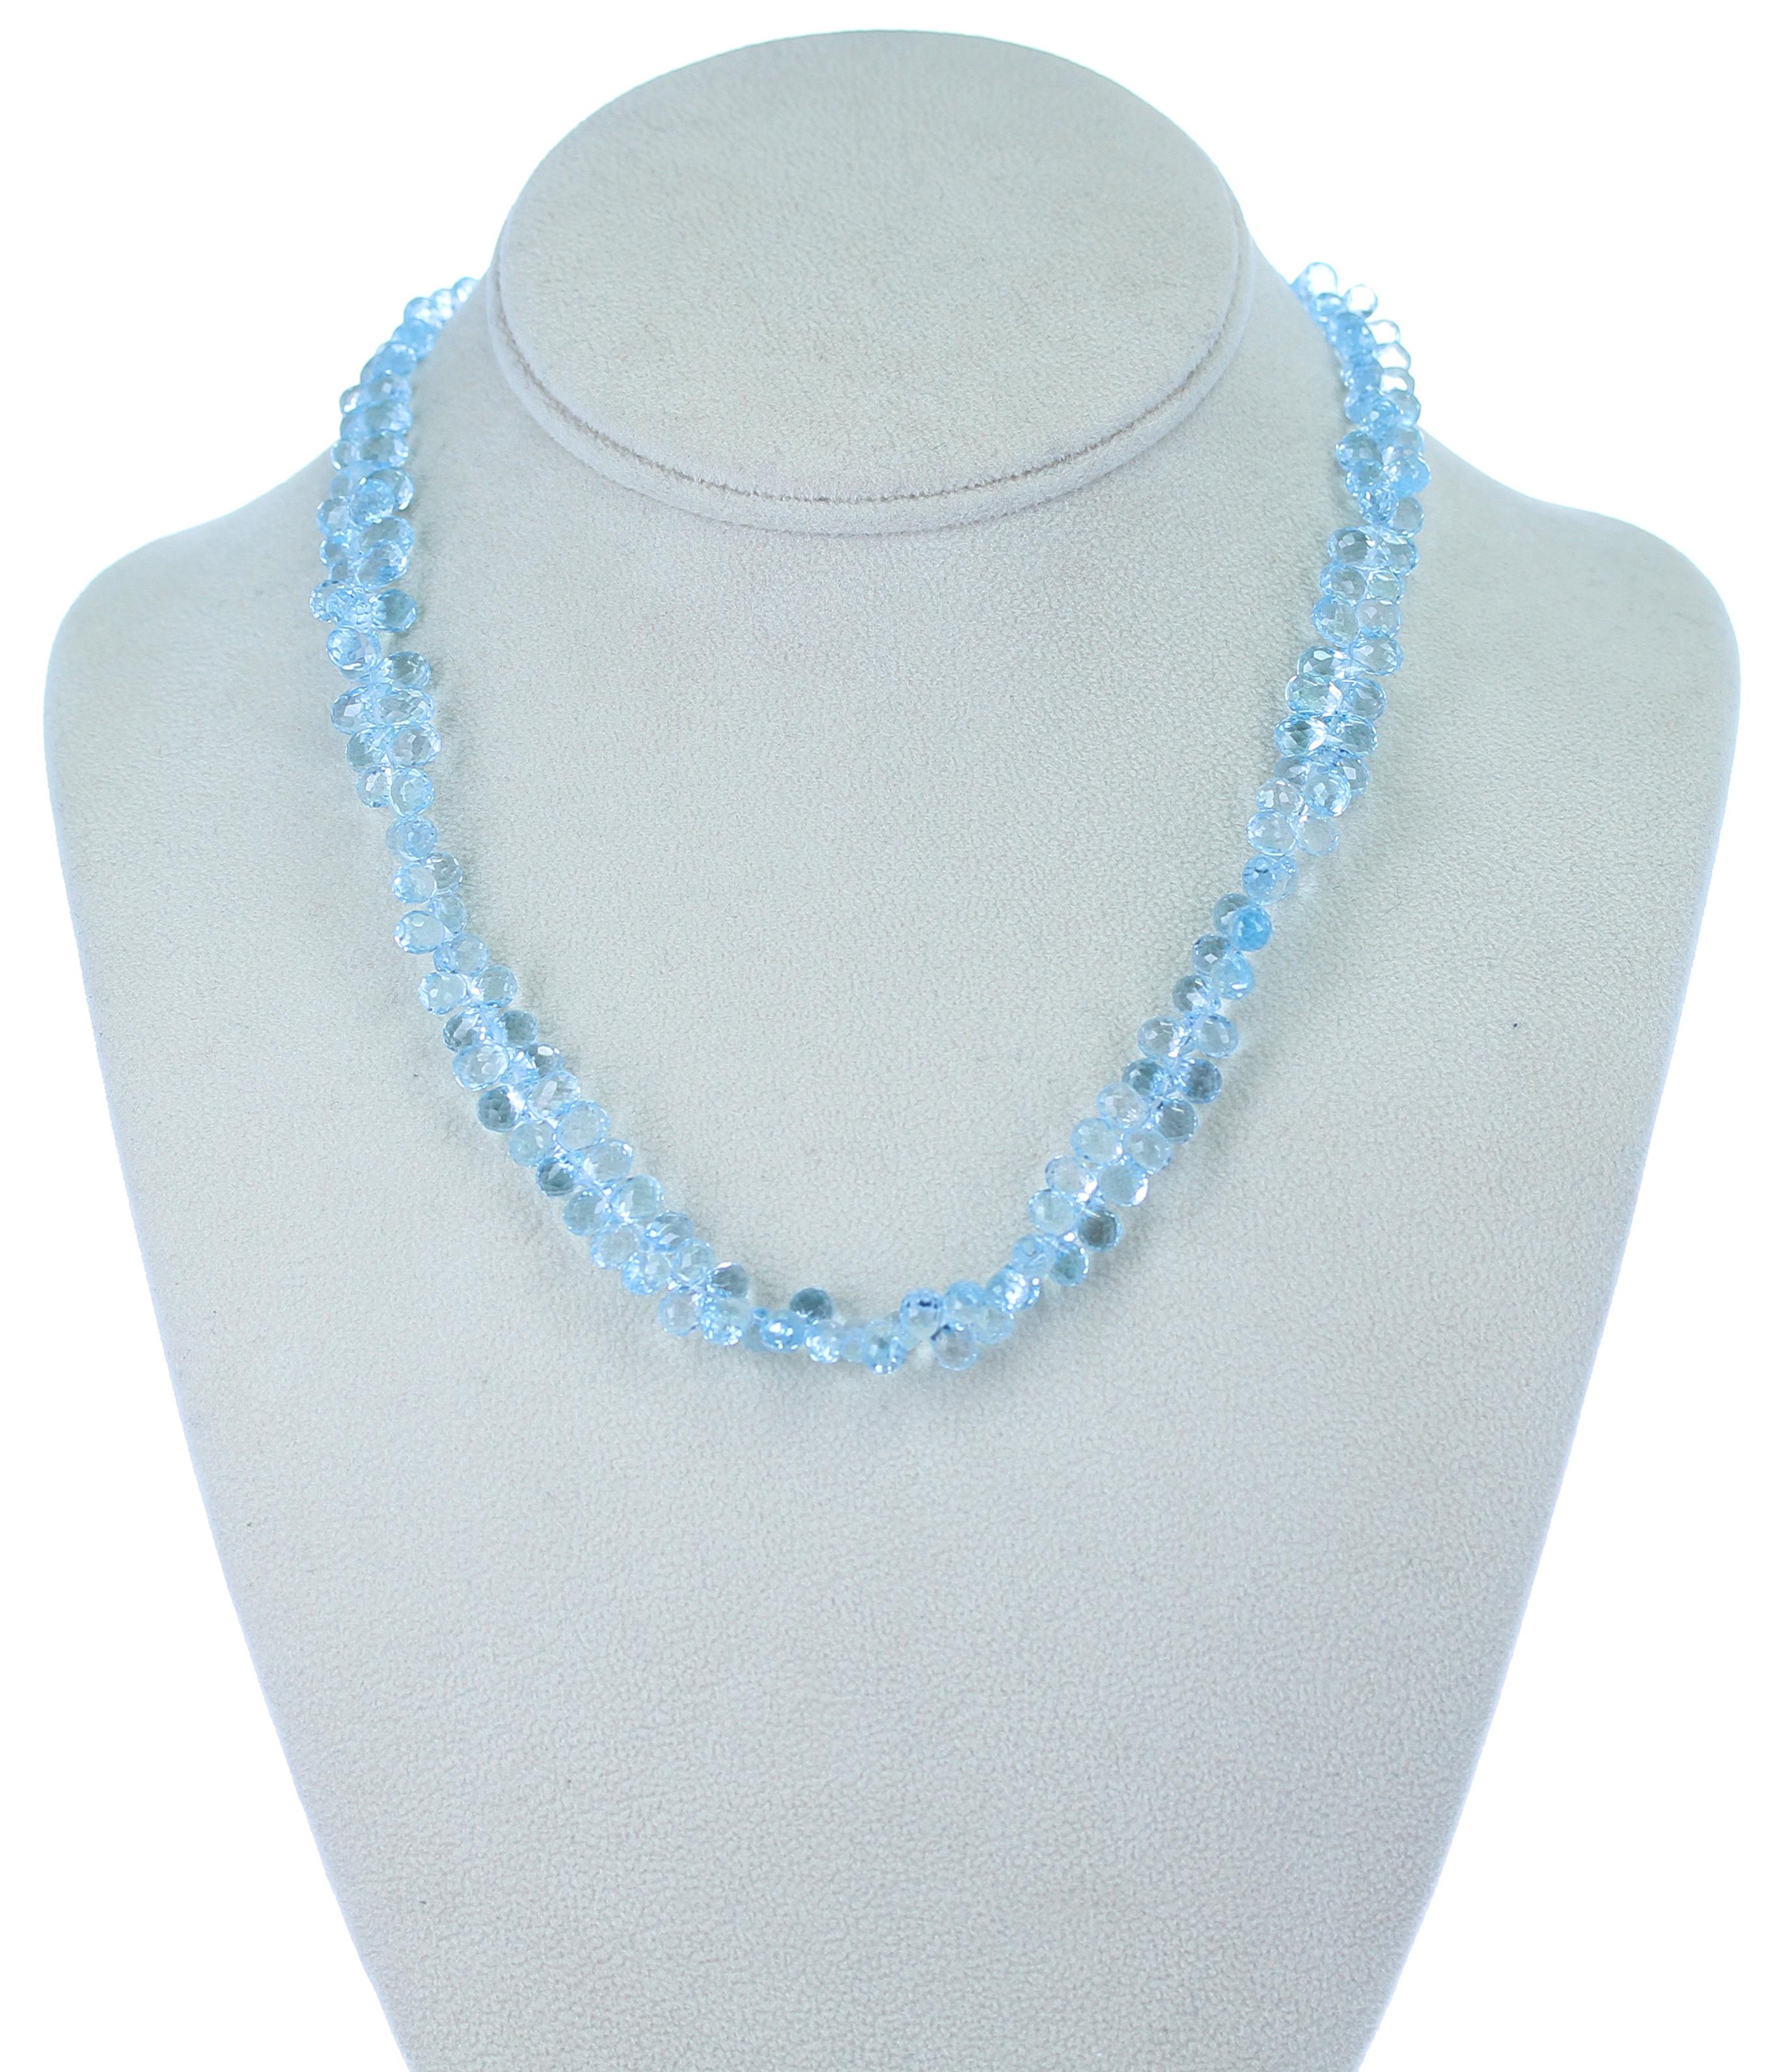 A beautiful Faceted Blue Topaz Briolette Drop Necklace weighing 200 carats. Length: 17.25 inches, 14K White Gold Clasp.